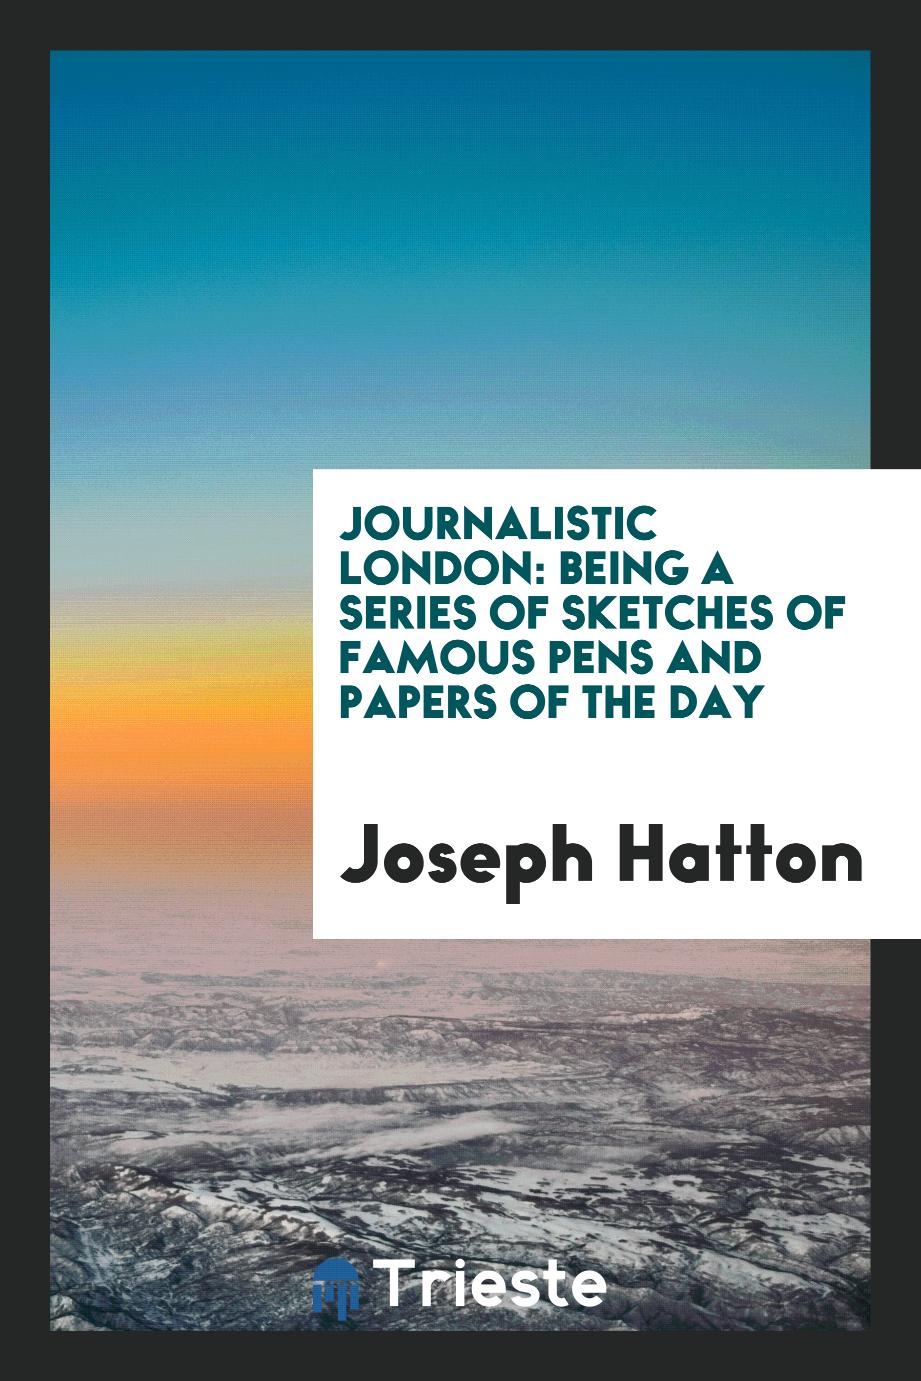 Journalistic London: Being a Series of Sketches of Famous Pens and Papers of the Day